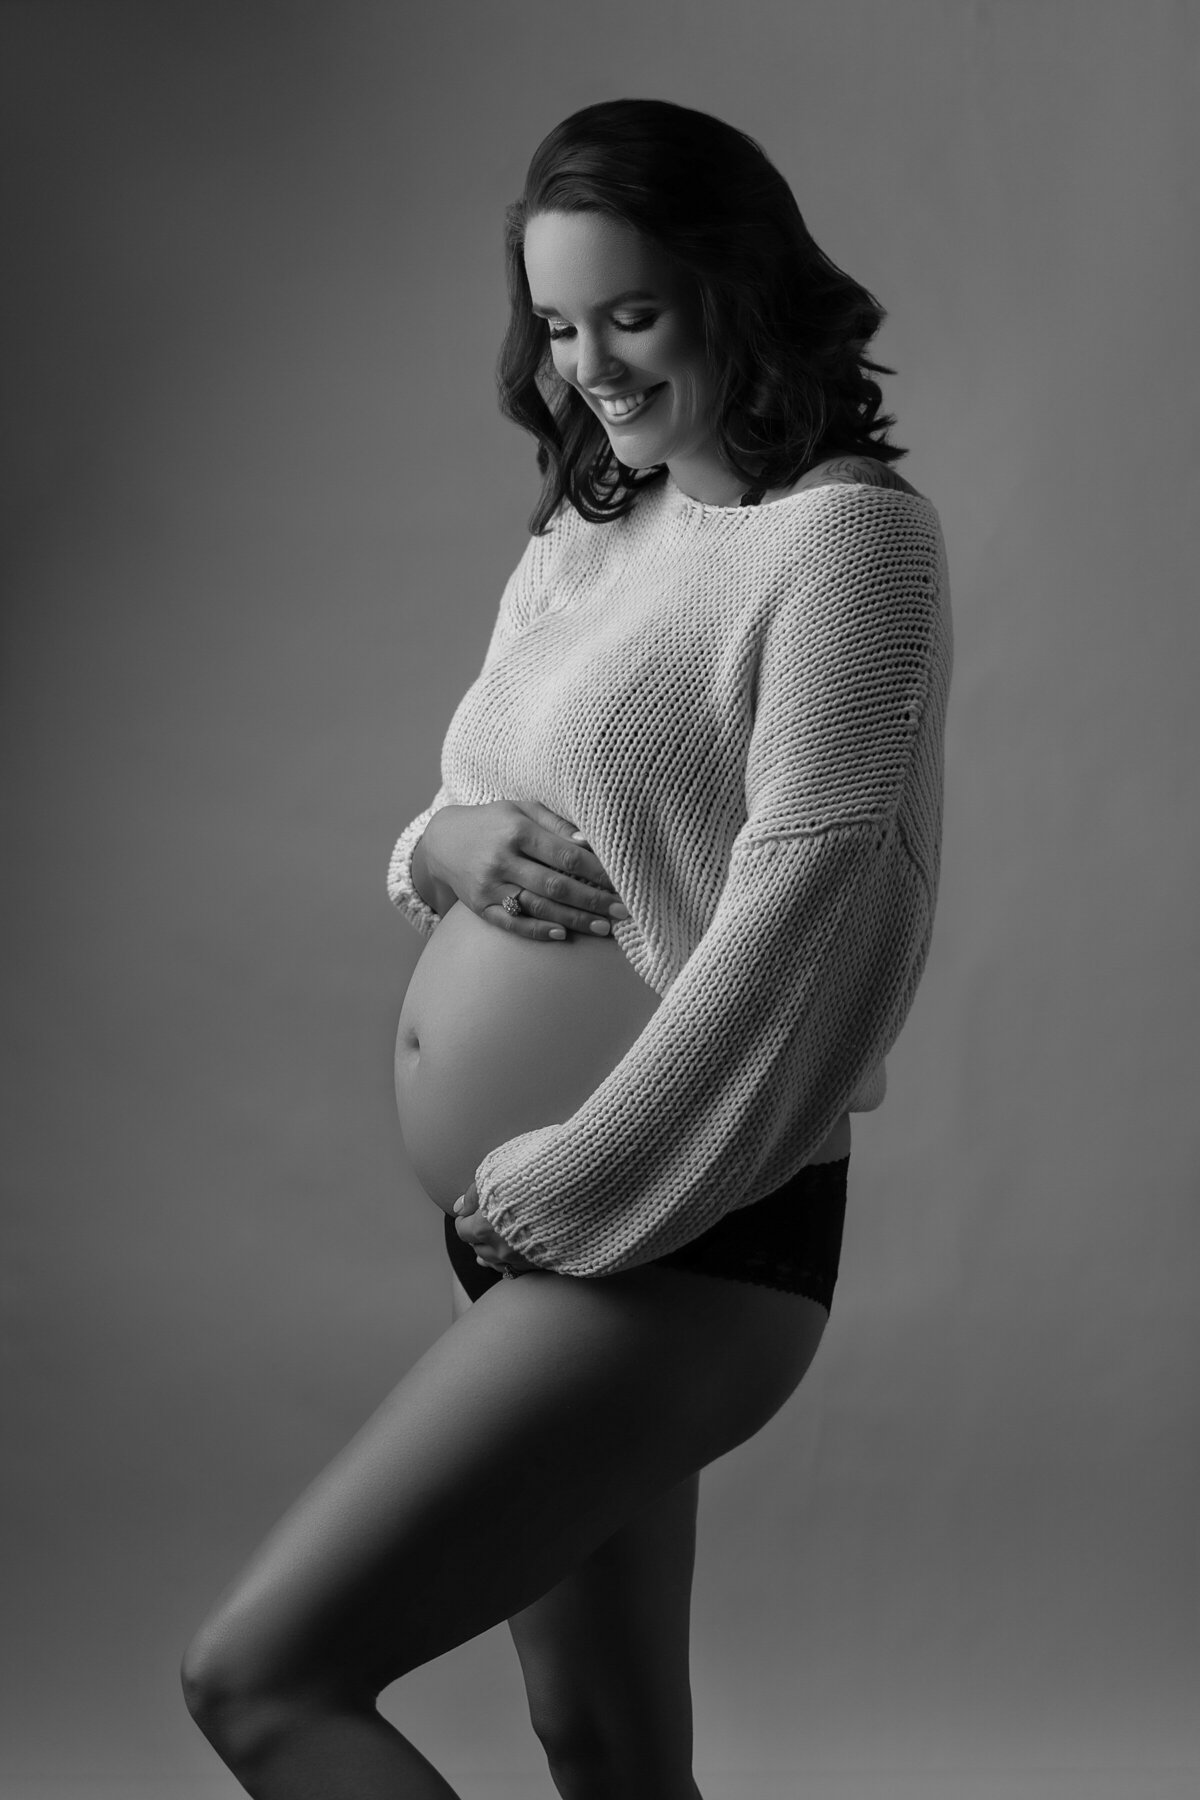 In BW Raleigh NC Maternity Portrait Photographer 3